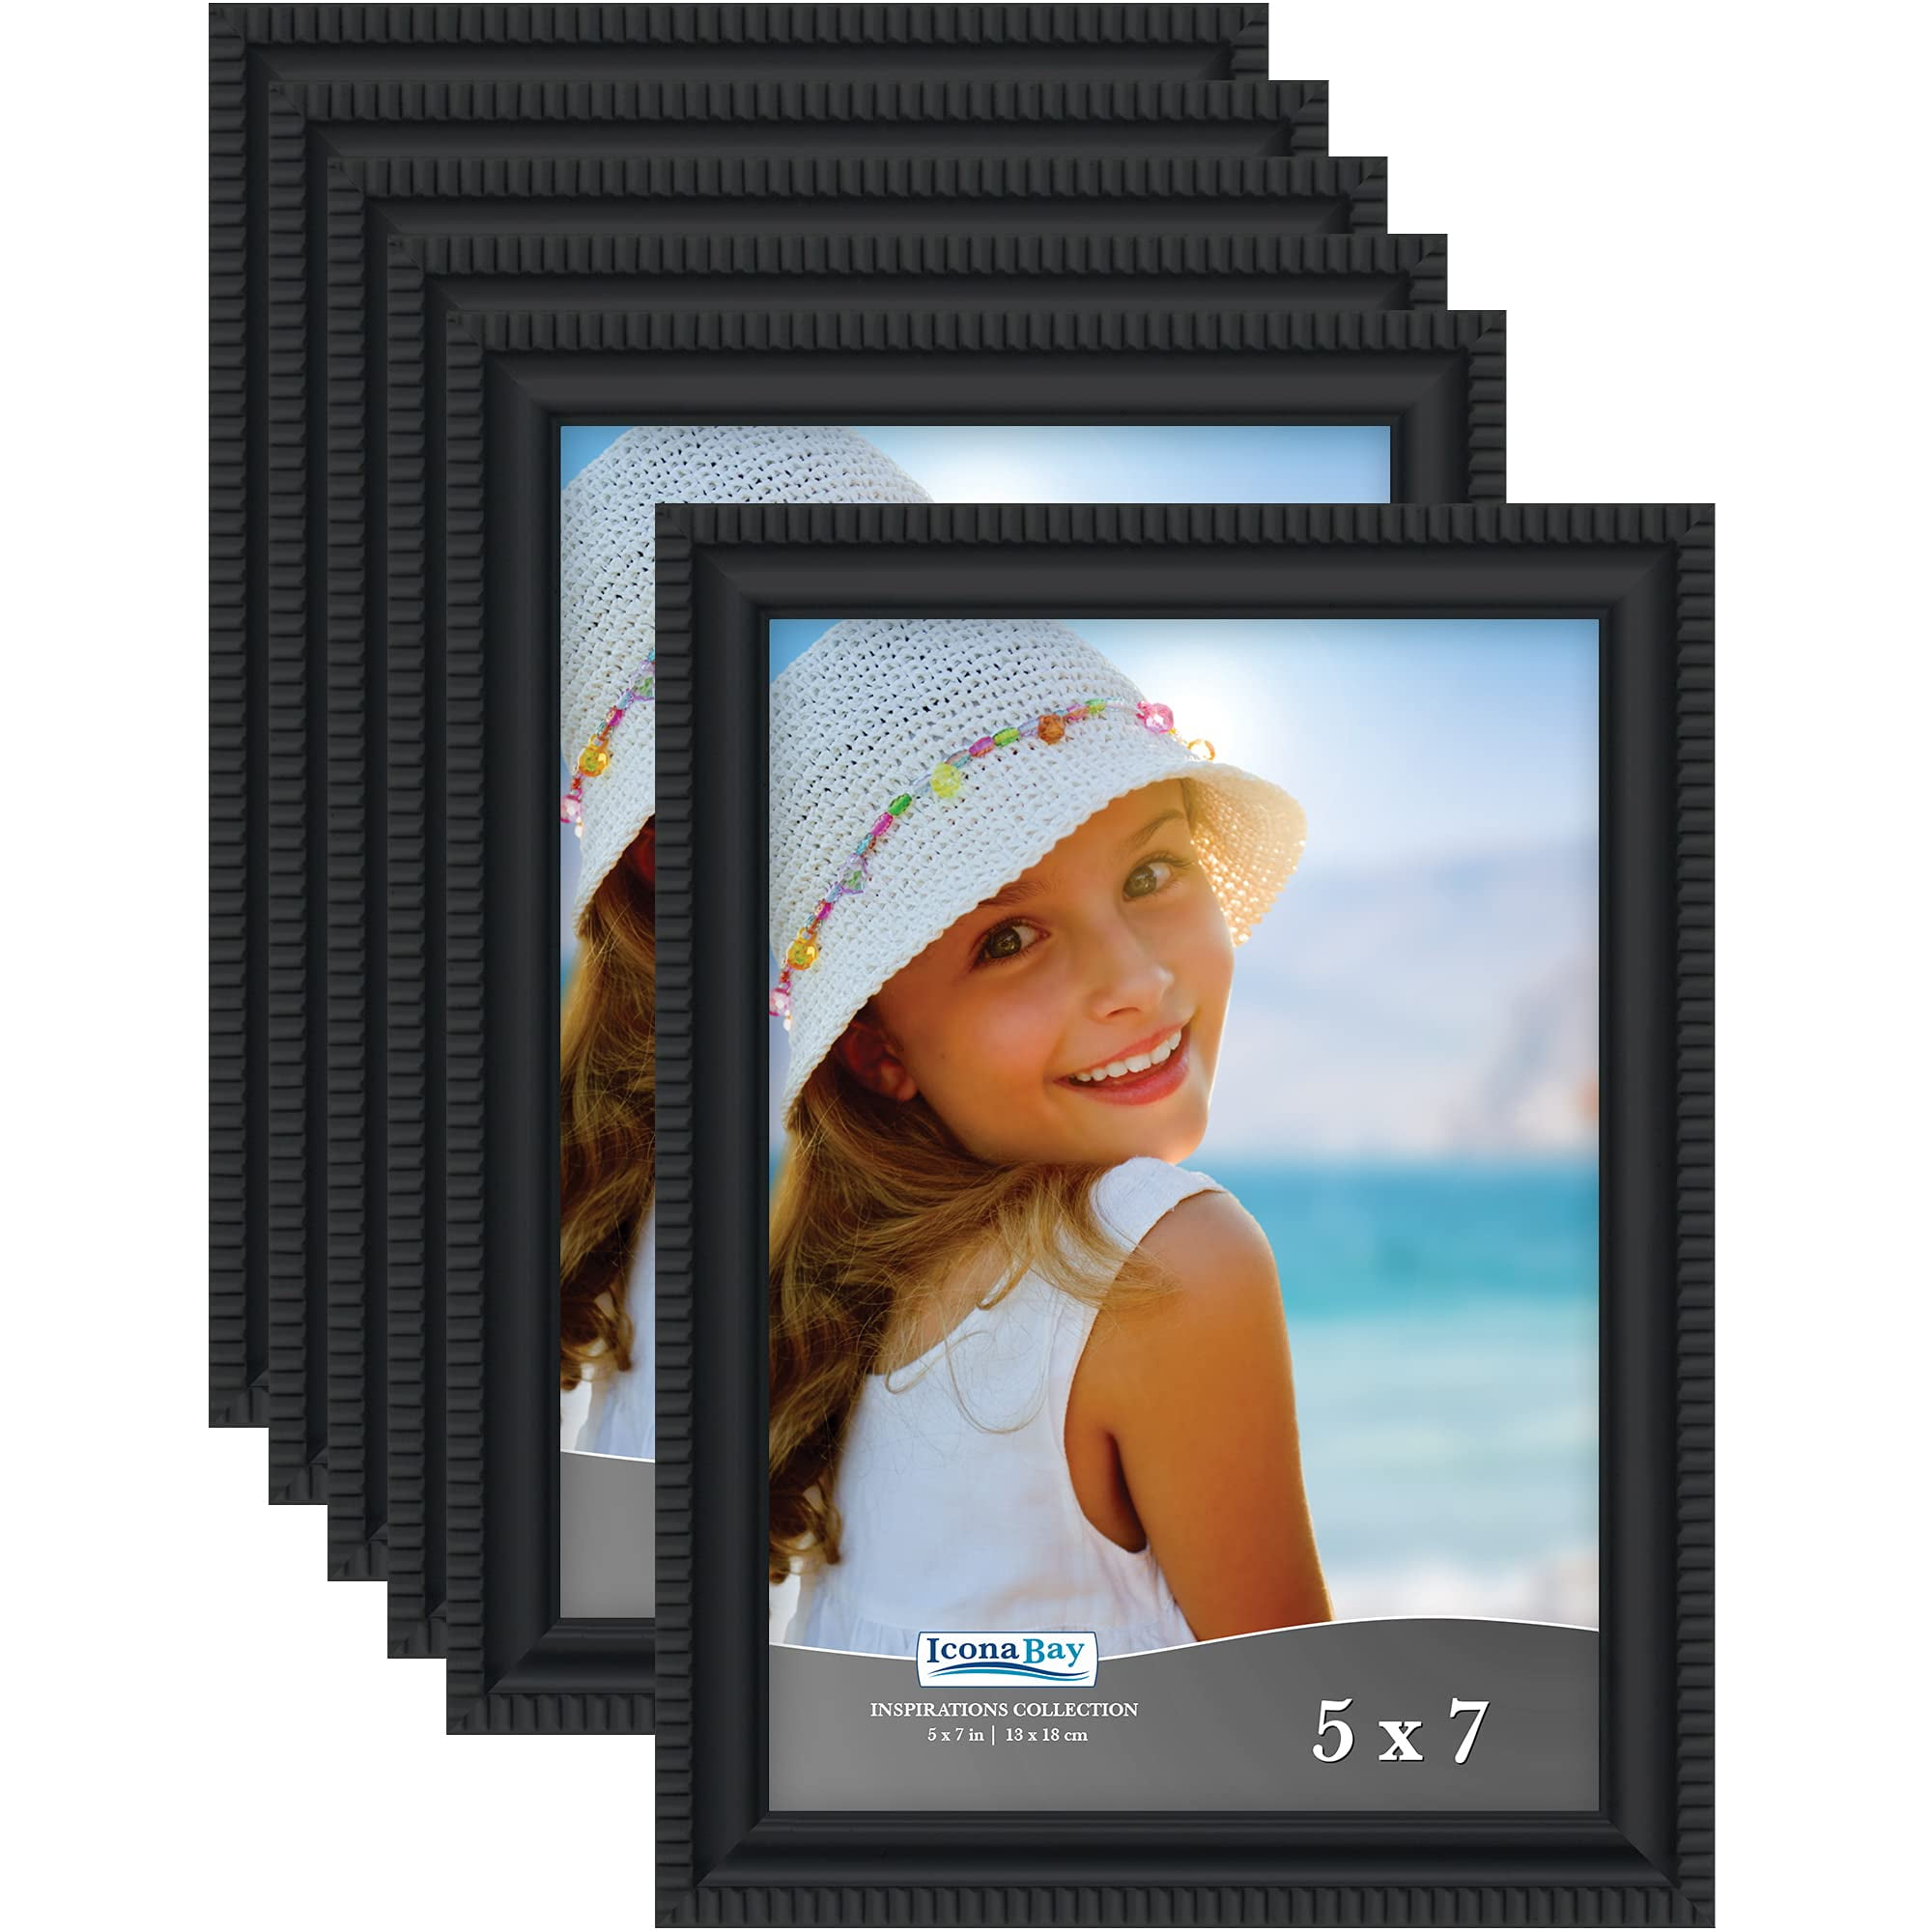 Icona Bay 8x10 Alder Gray Picture Frame with Mat for 5x7 Photo, 1 Pack, Exclusives Collection (US Company), Size: 8x10 Mat to 5x7